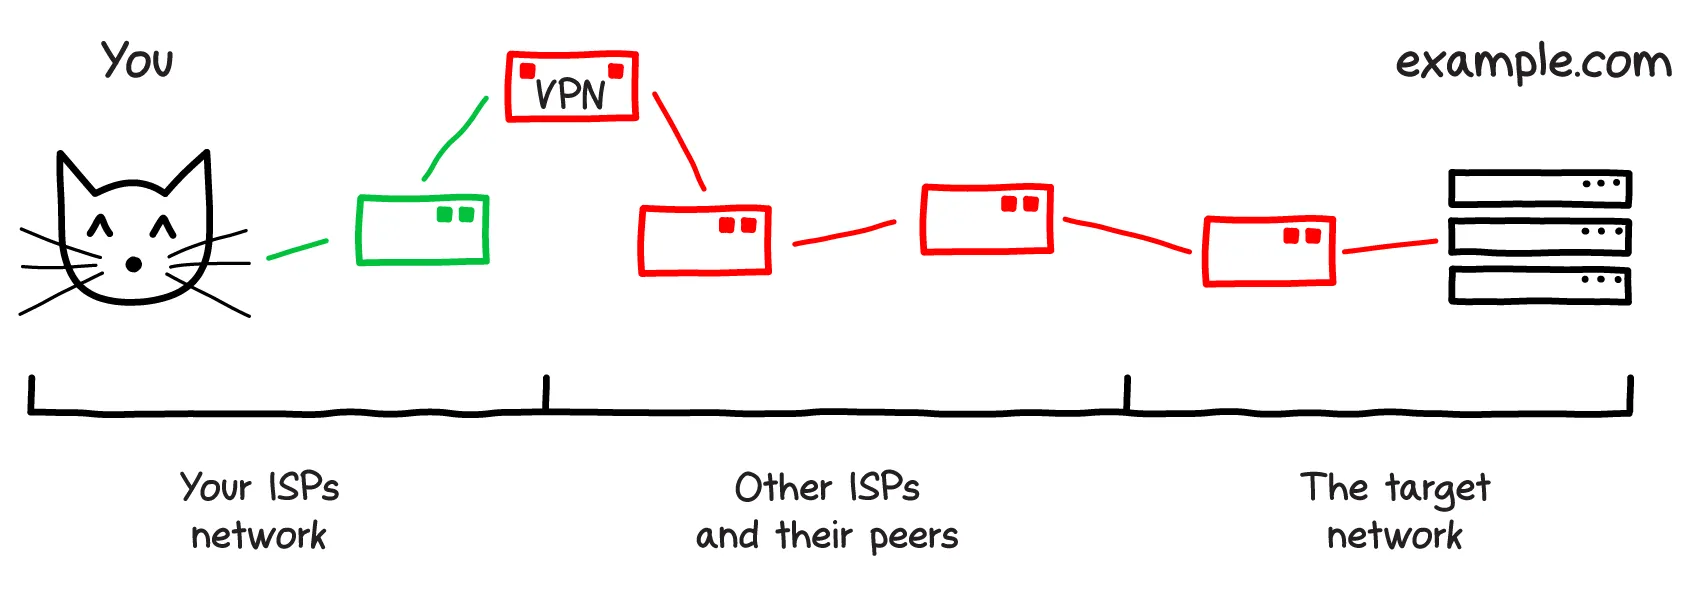 VPN doing what a VPN does: Encrypting traffic from your client to the VPN endpoint.